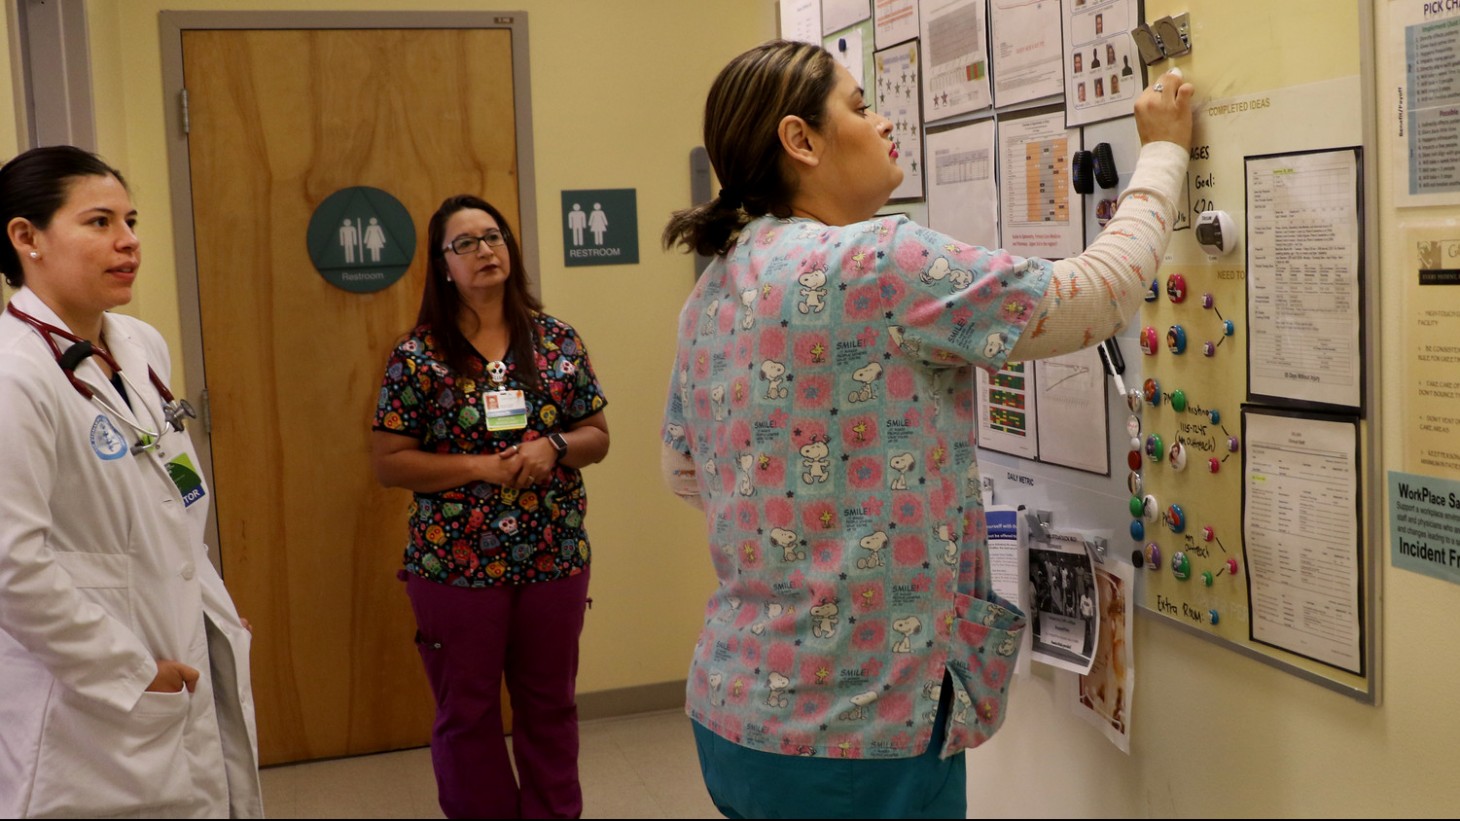 Health care workers filling in a huddle board in a clinic hallway 